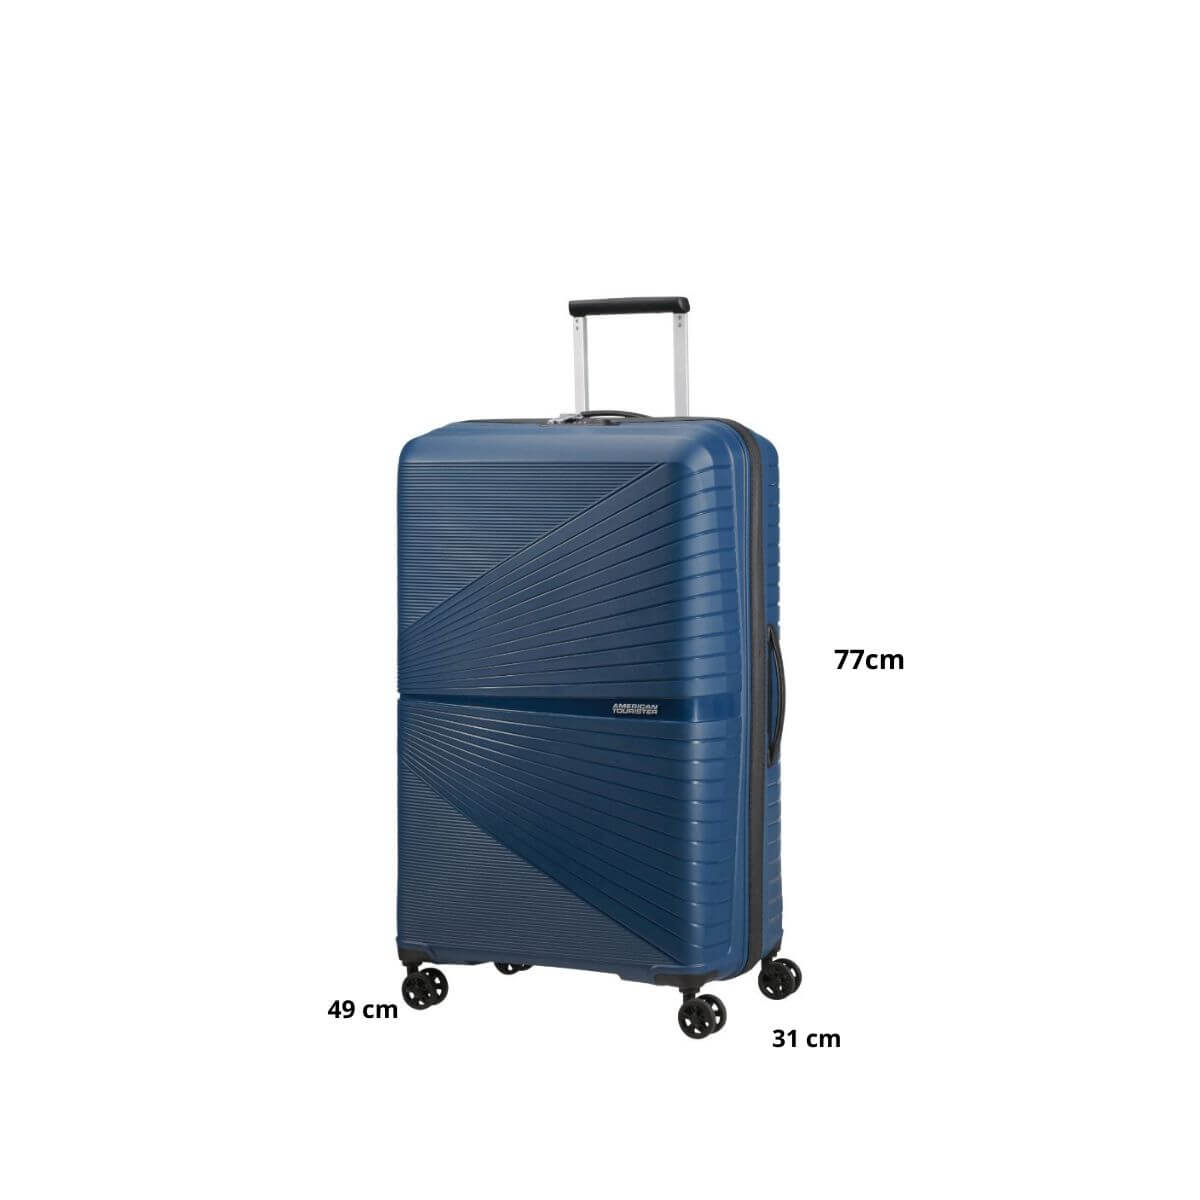 AMERICAN TOURISTER TROLLEY GRANDE 88G-003-41 AIRCONIC MIDNIGHT NAVY